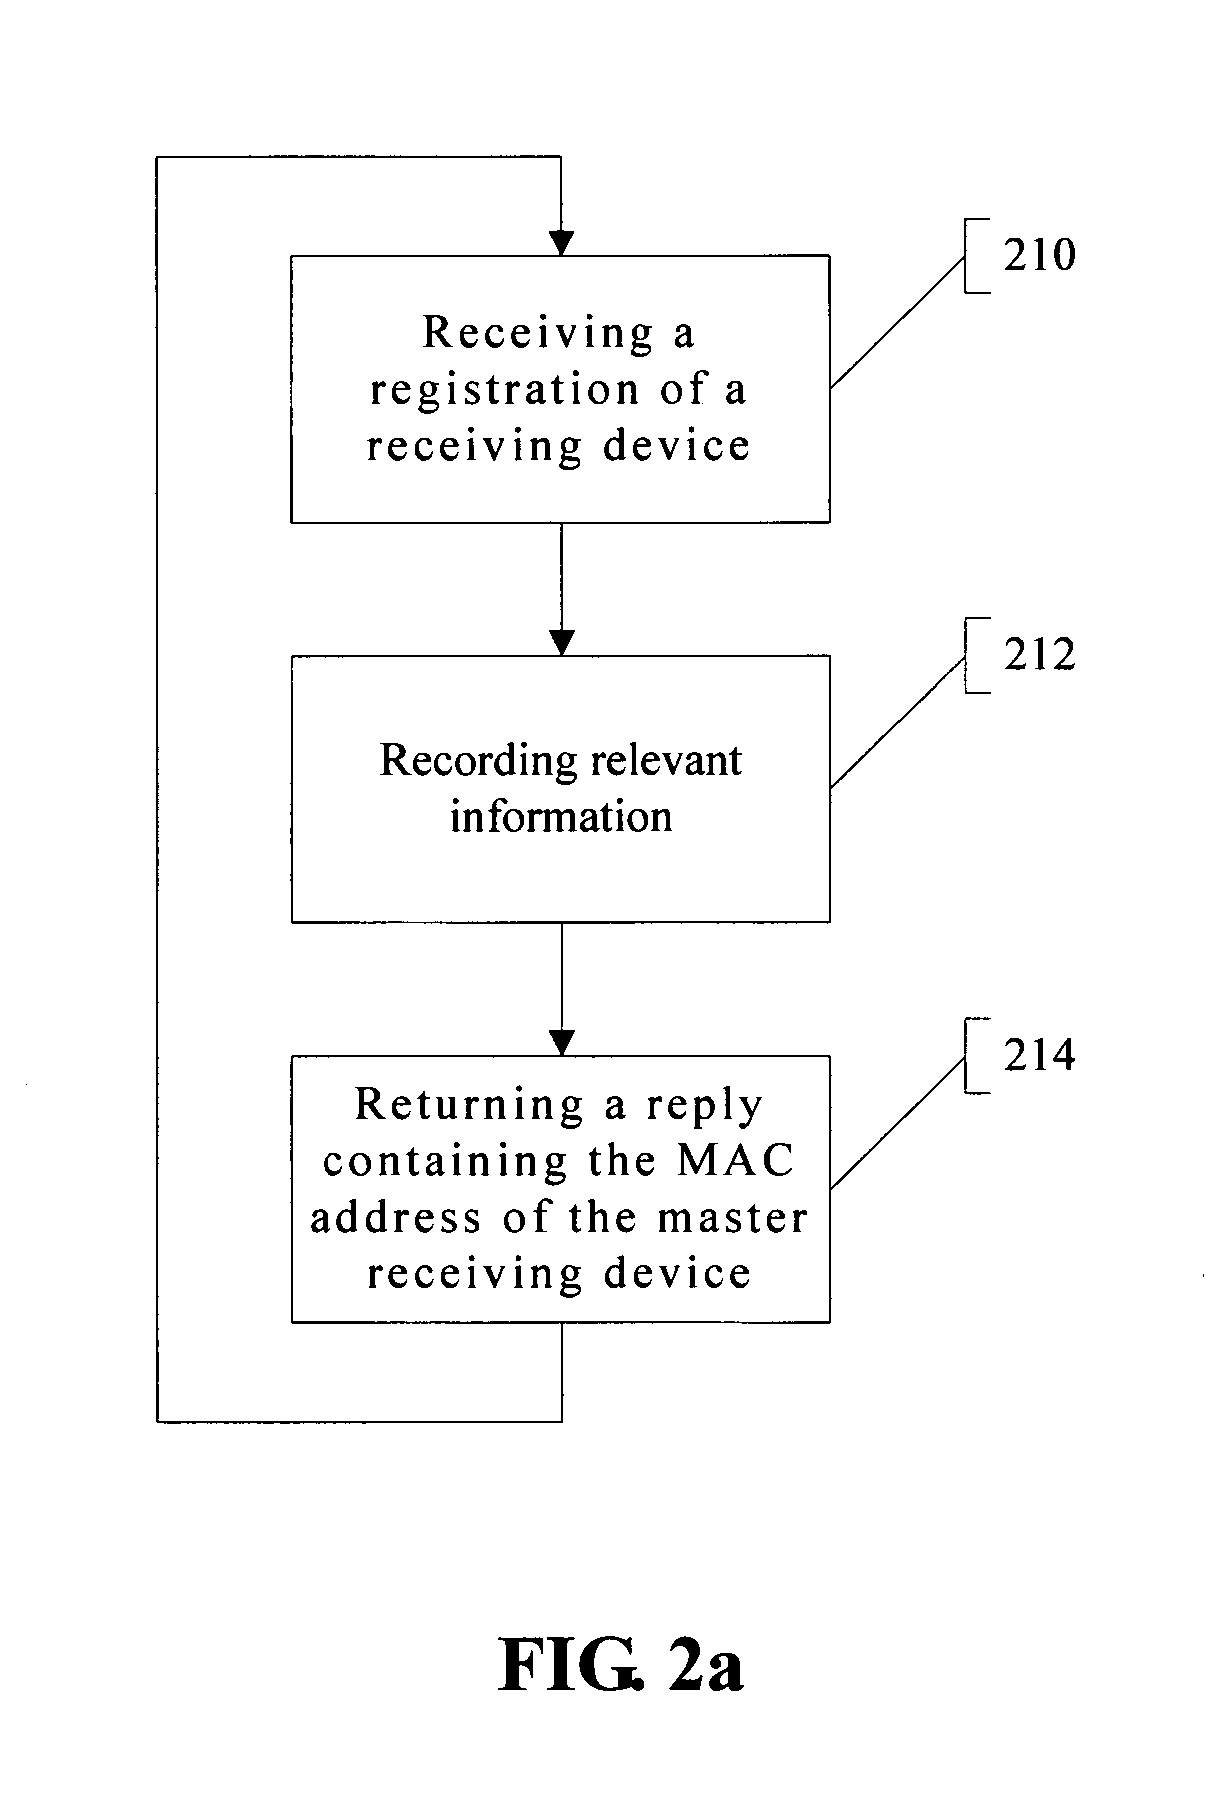 Method of multicasting multimedia information over wireless local area network